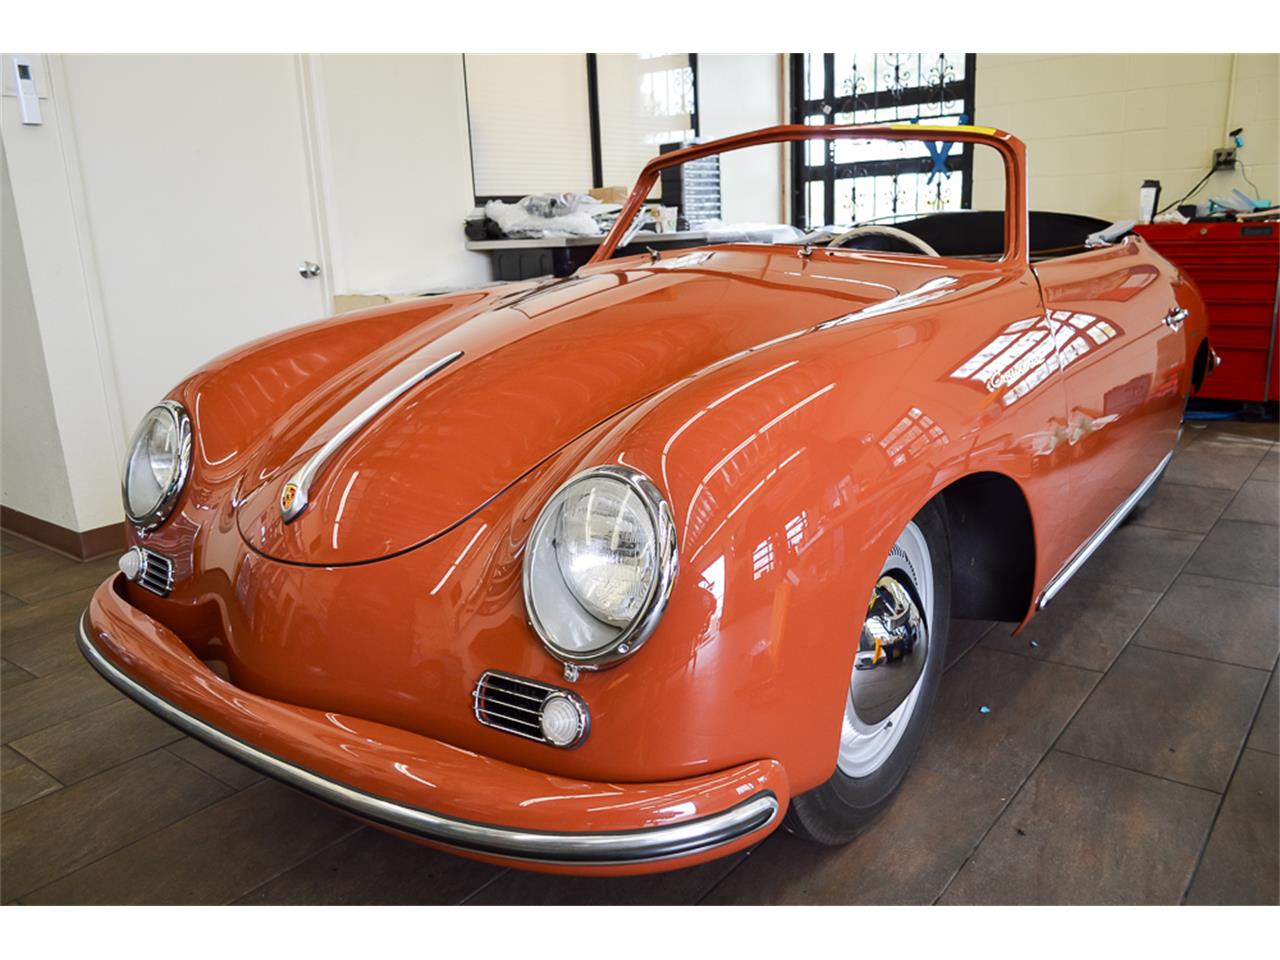 1955 Porsche 356 Continental Cabriolet for sale in Fallbrook, CA – photo 26